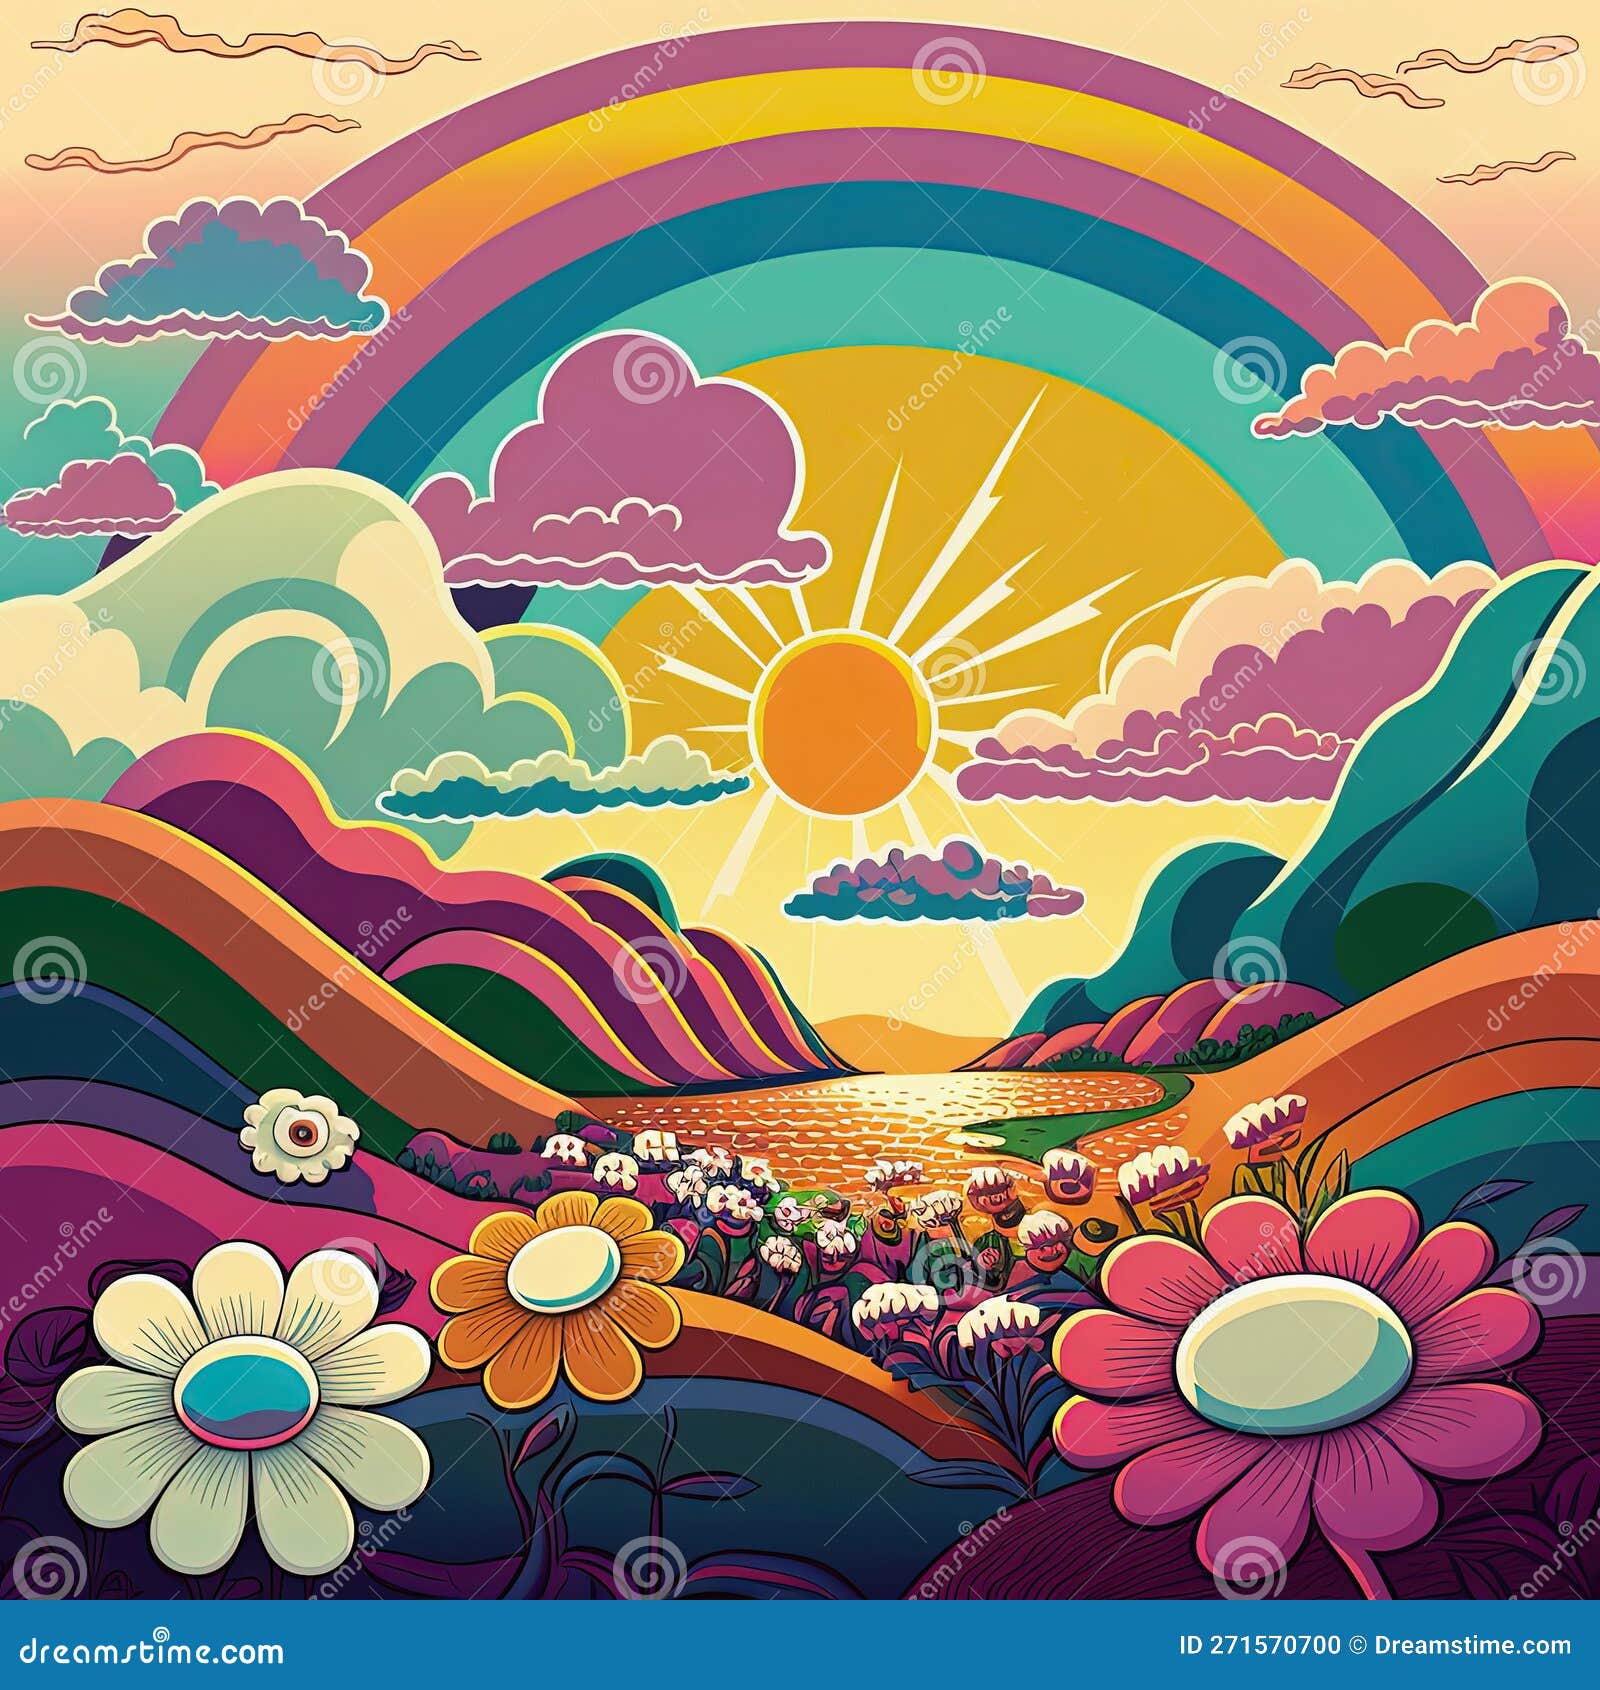 Hippie Groovy Flower Background Graphic by Lazy Sun · Creative Fabrica